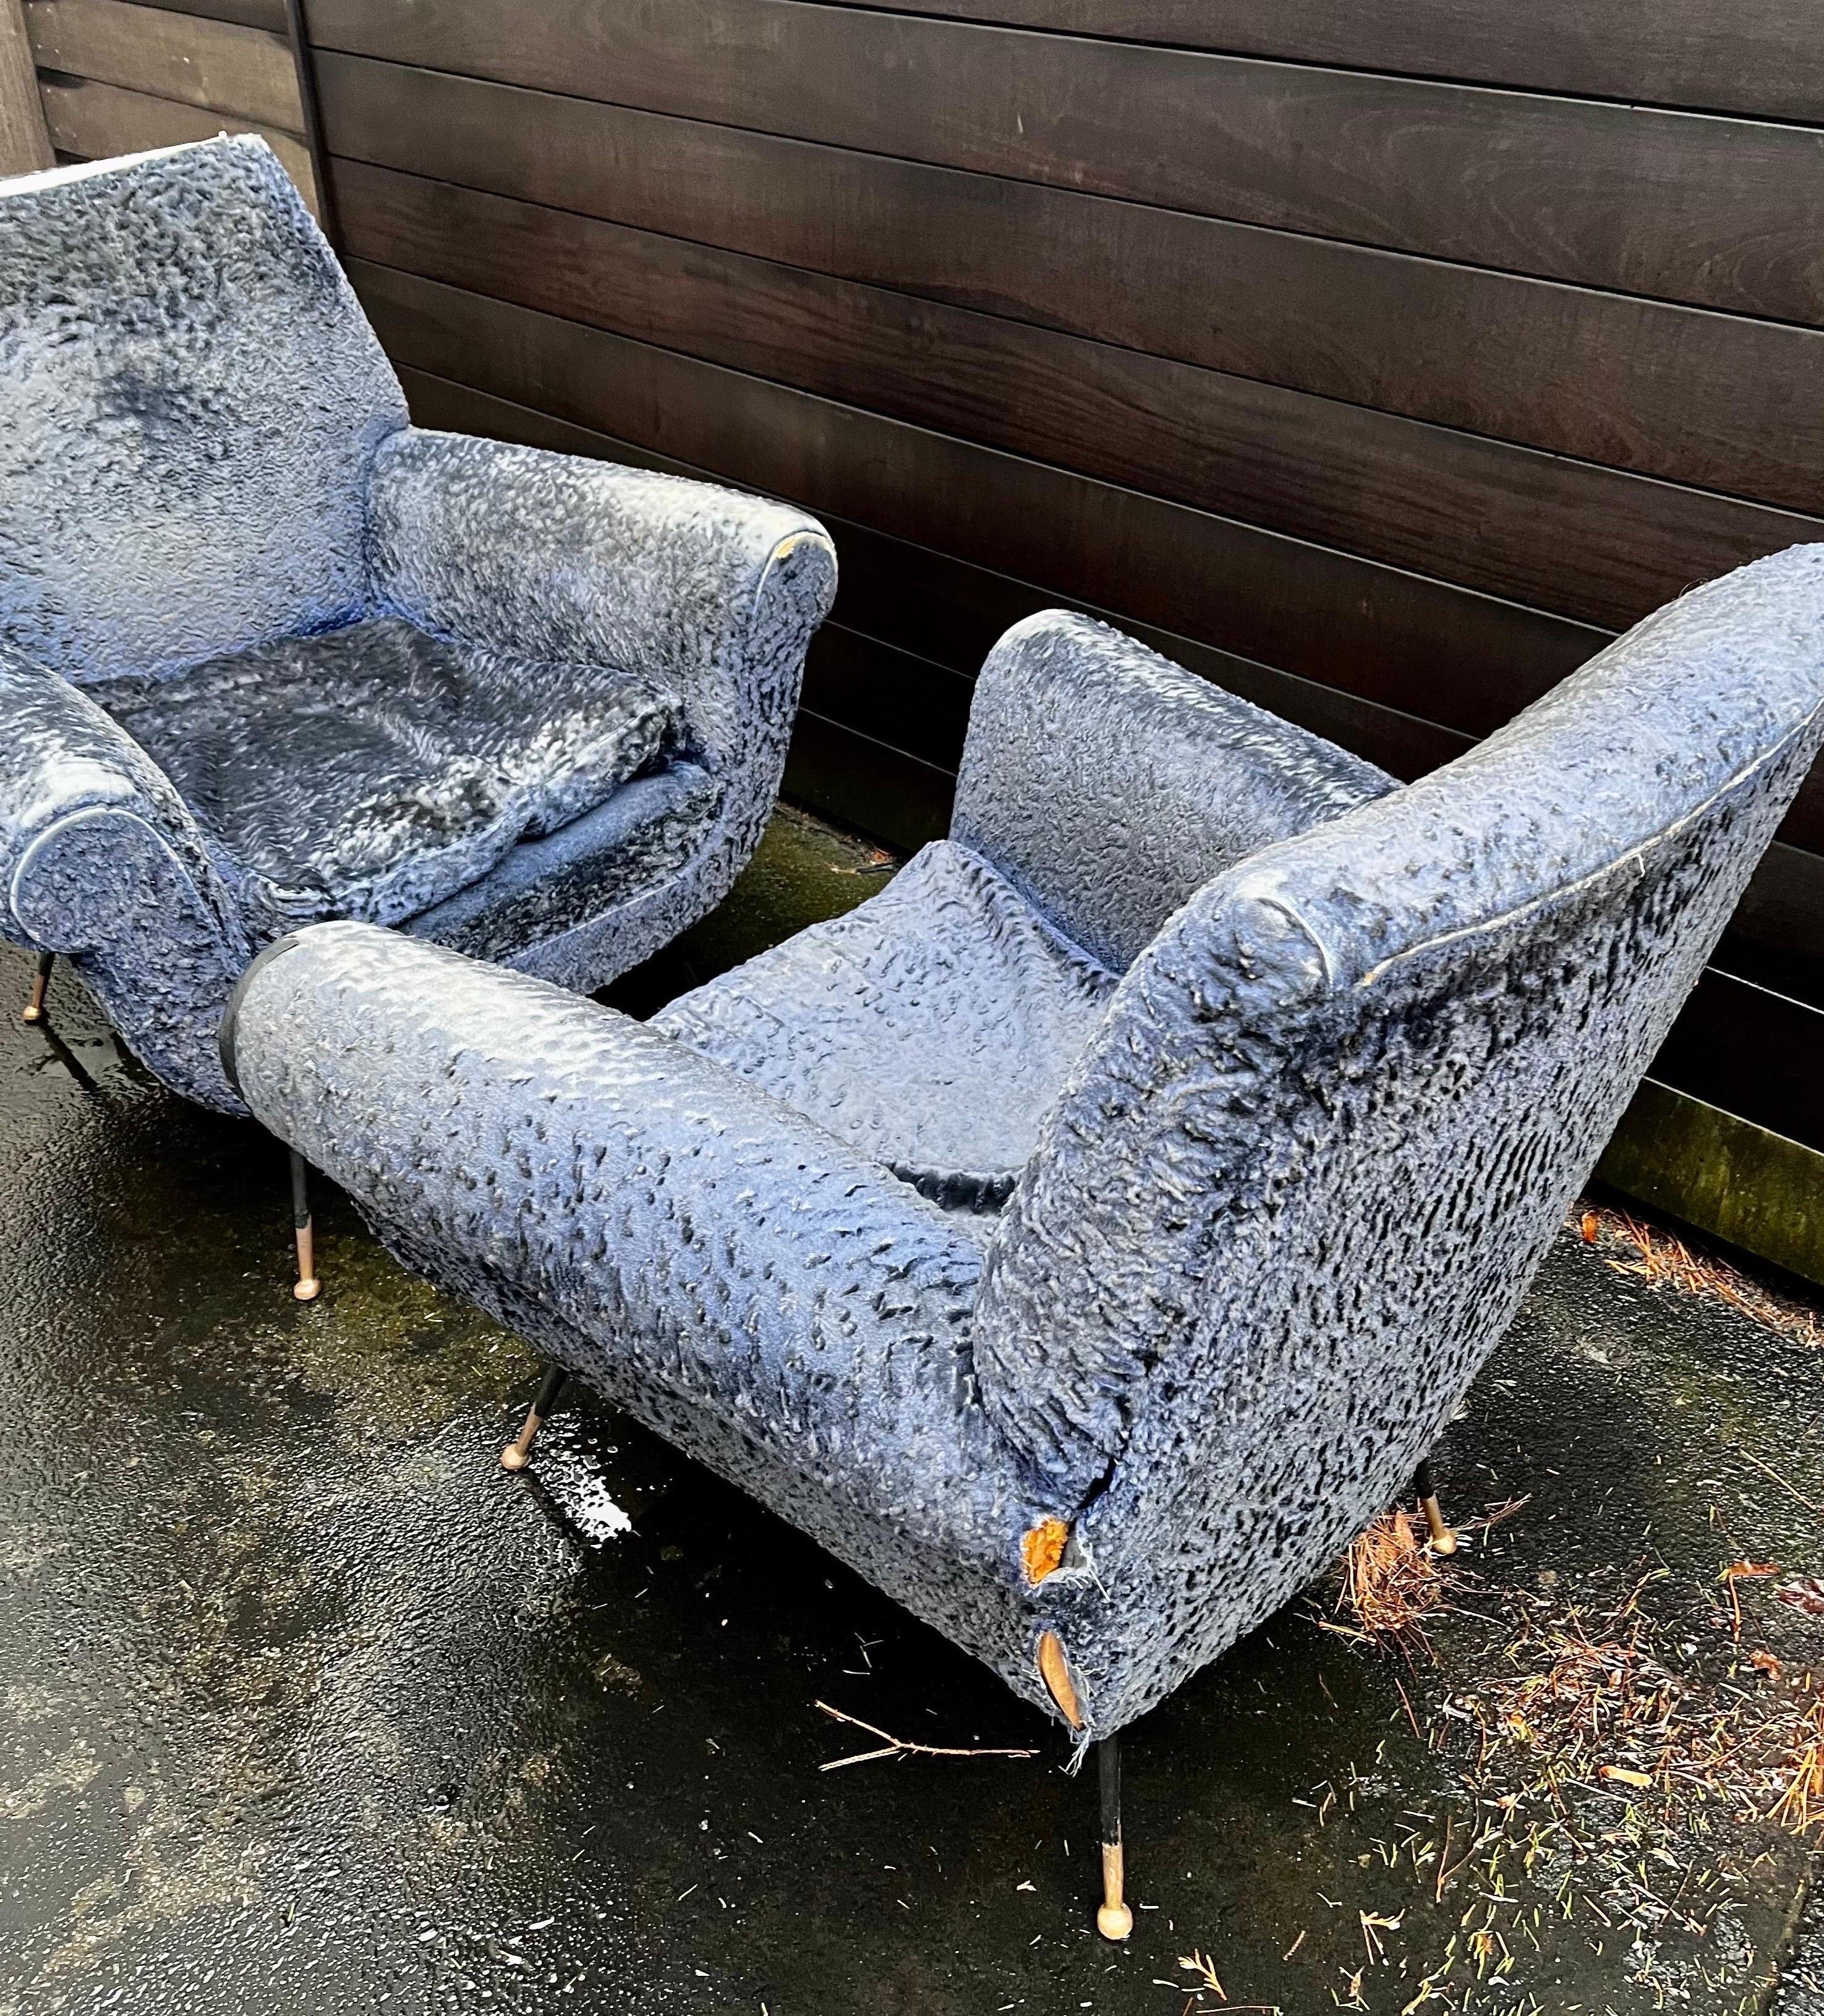 Pair of Gigi Radice Club Chairs for Minotti, c. 1950 (for restoration) For Sale 3